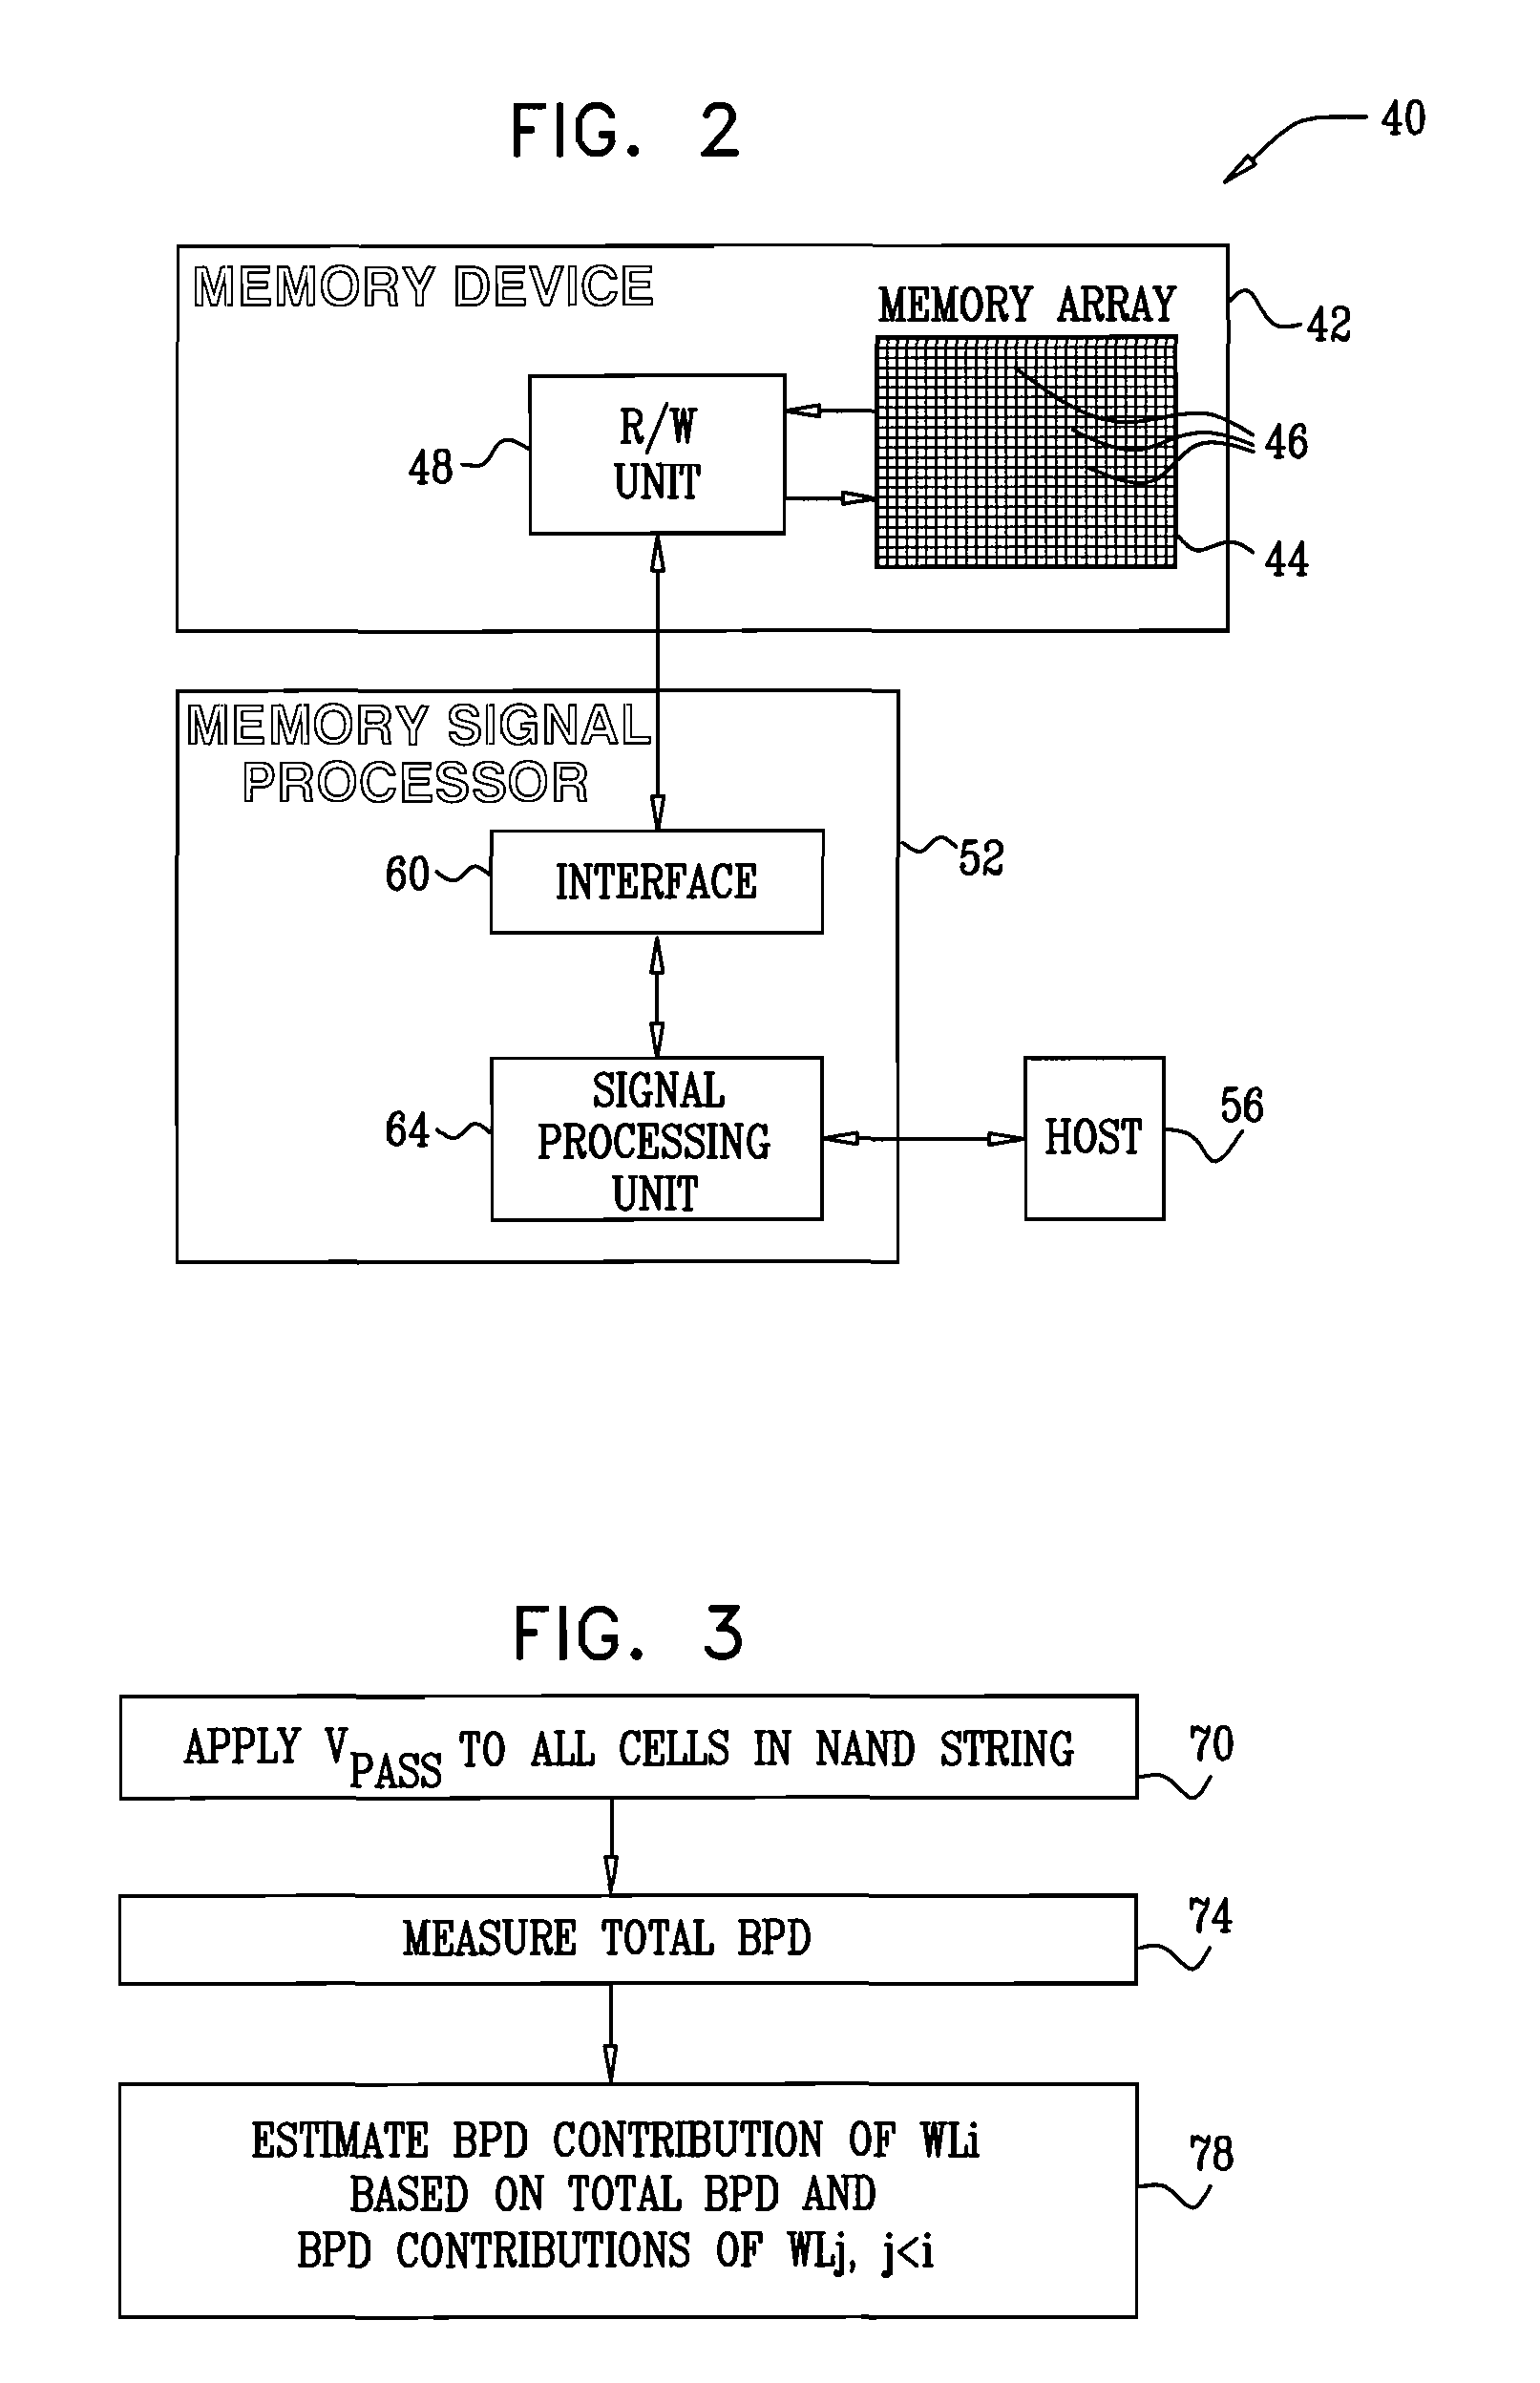 Reduction of back pattern dependency effects in memory devices